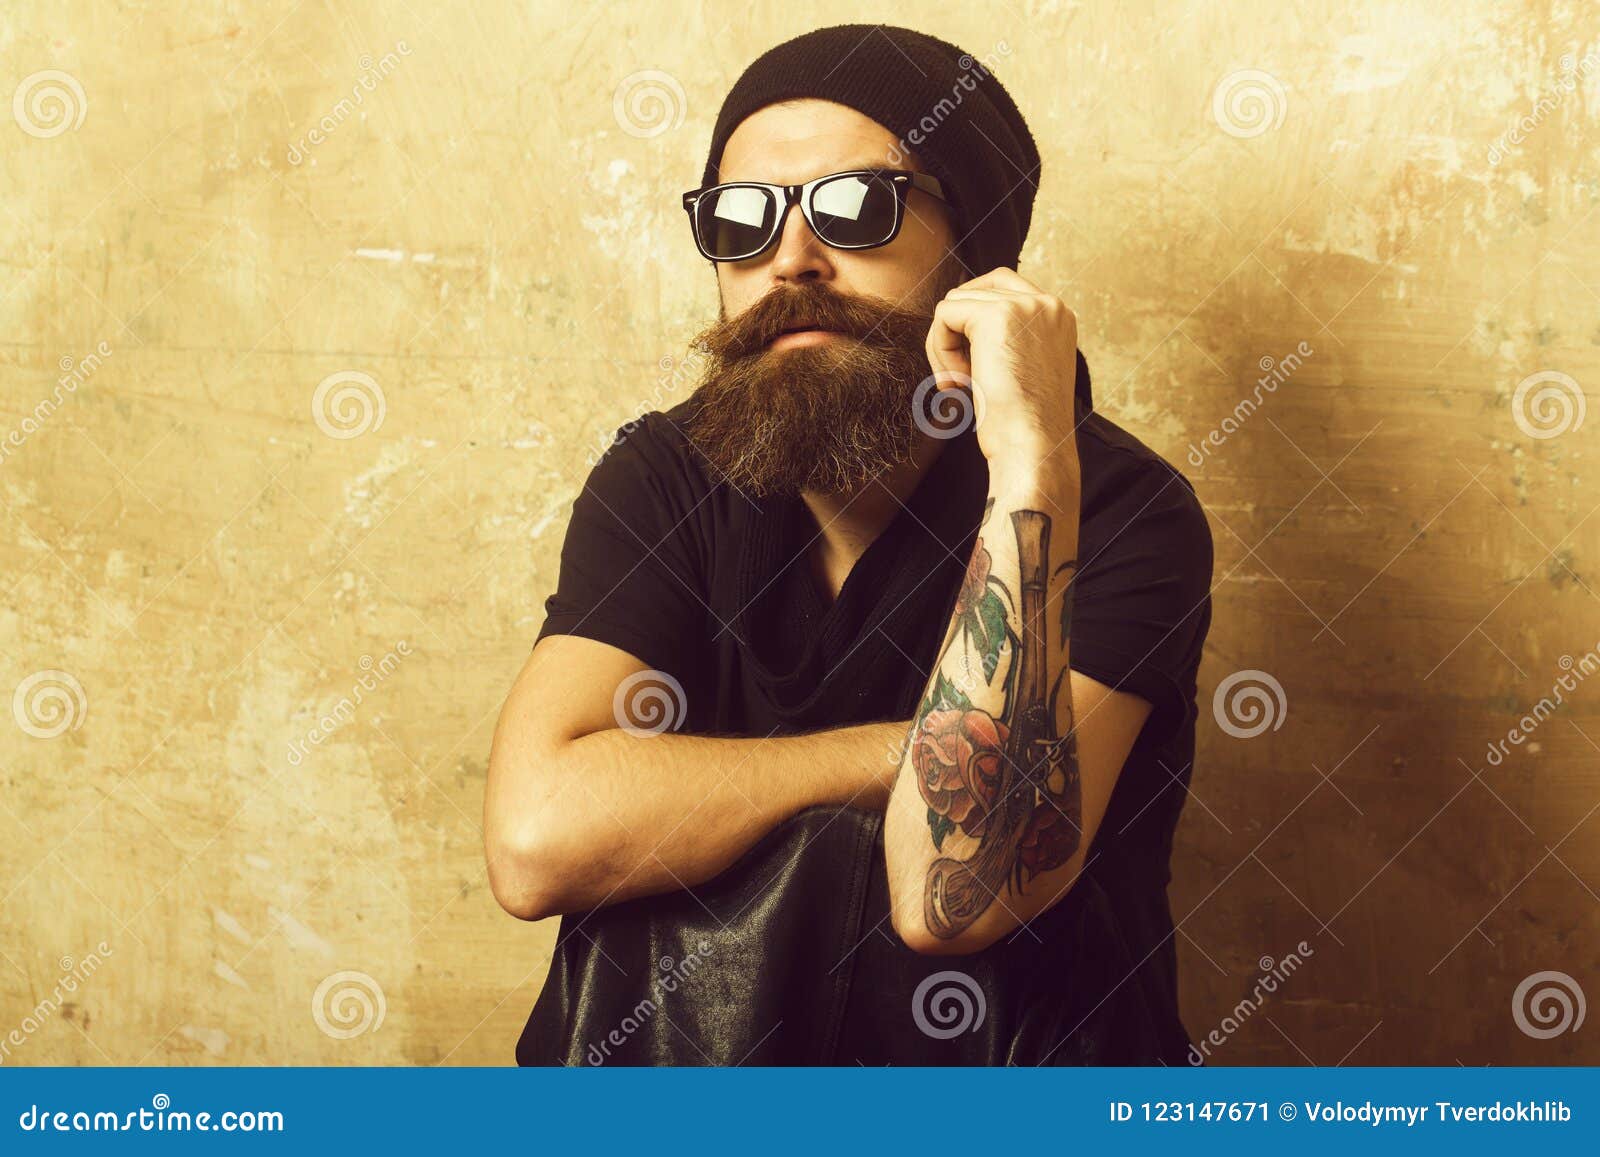 Hipster In Leather Jacket And Hat With Glasses Stock Image Image Of Hair Fashionable 123147671